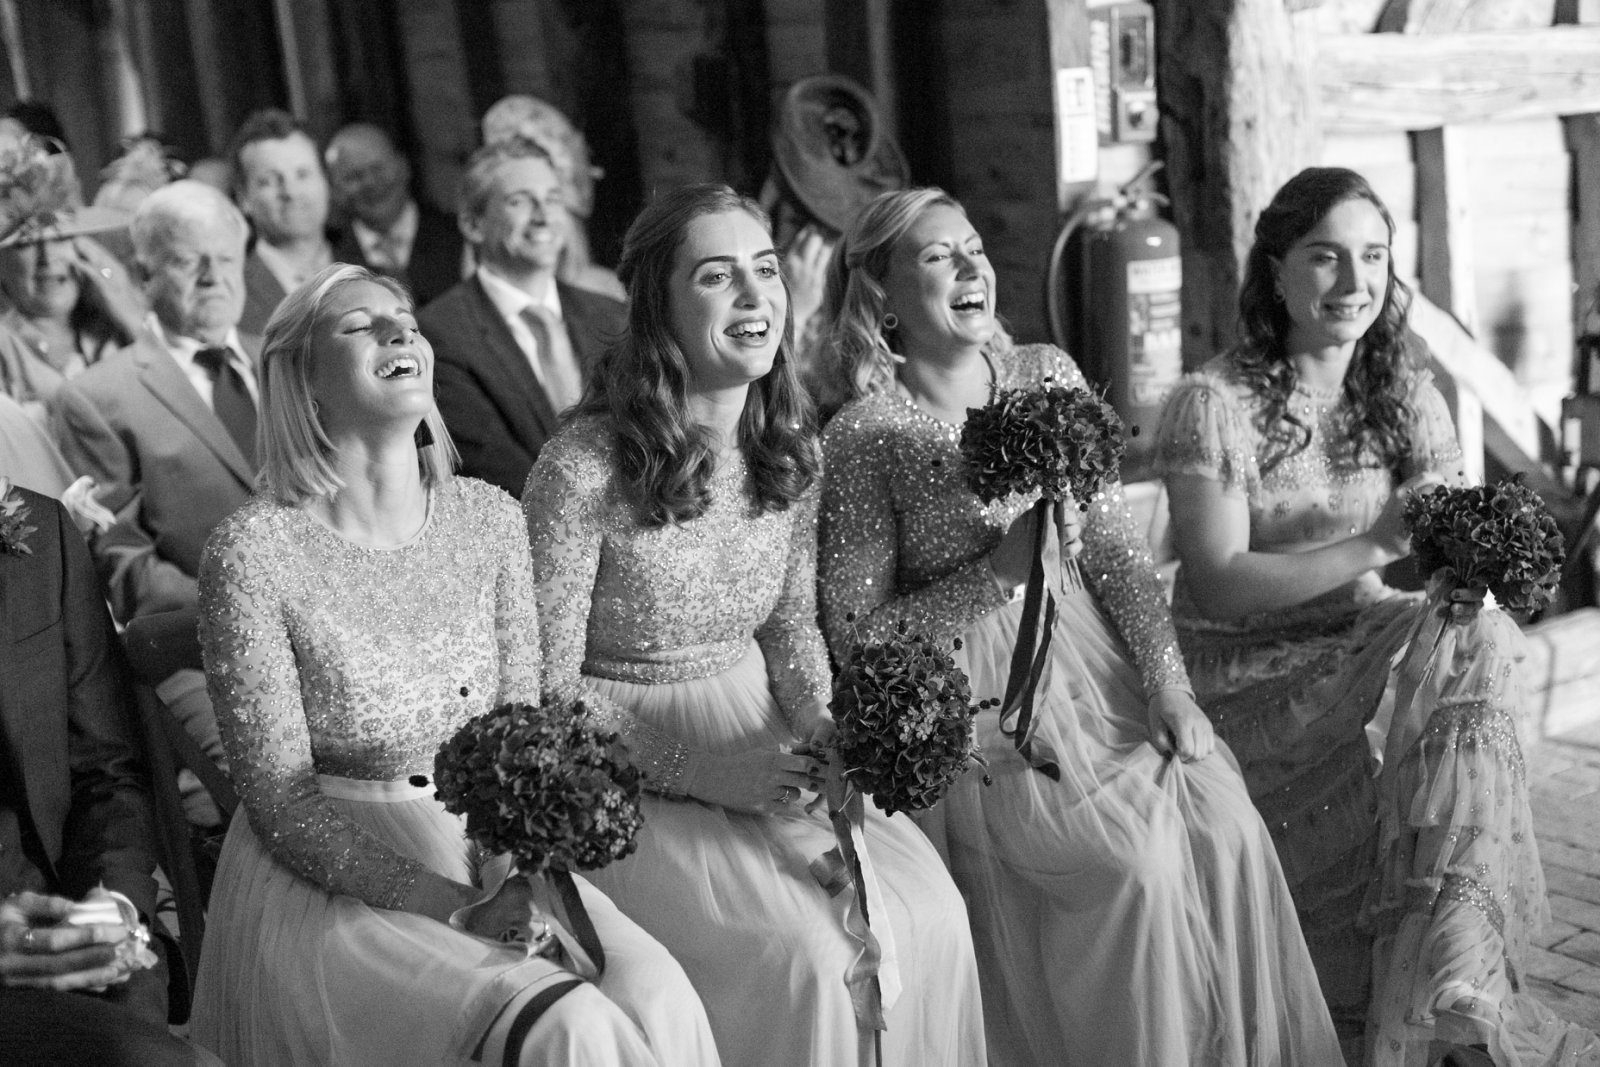 Bridesmaids laughing during the wedding ceremony